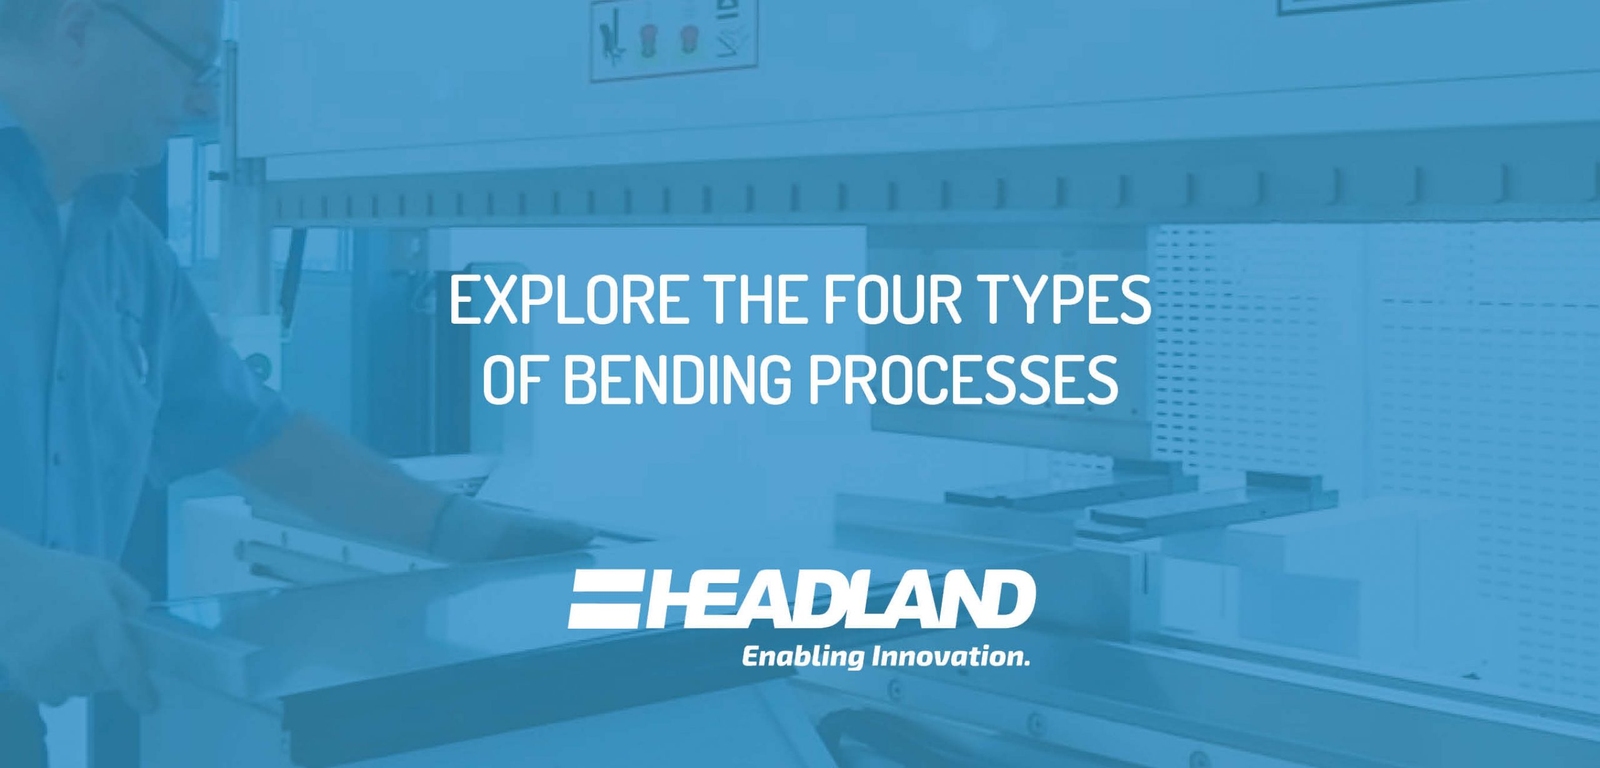 Explore the Four Types of Bending Processes